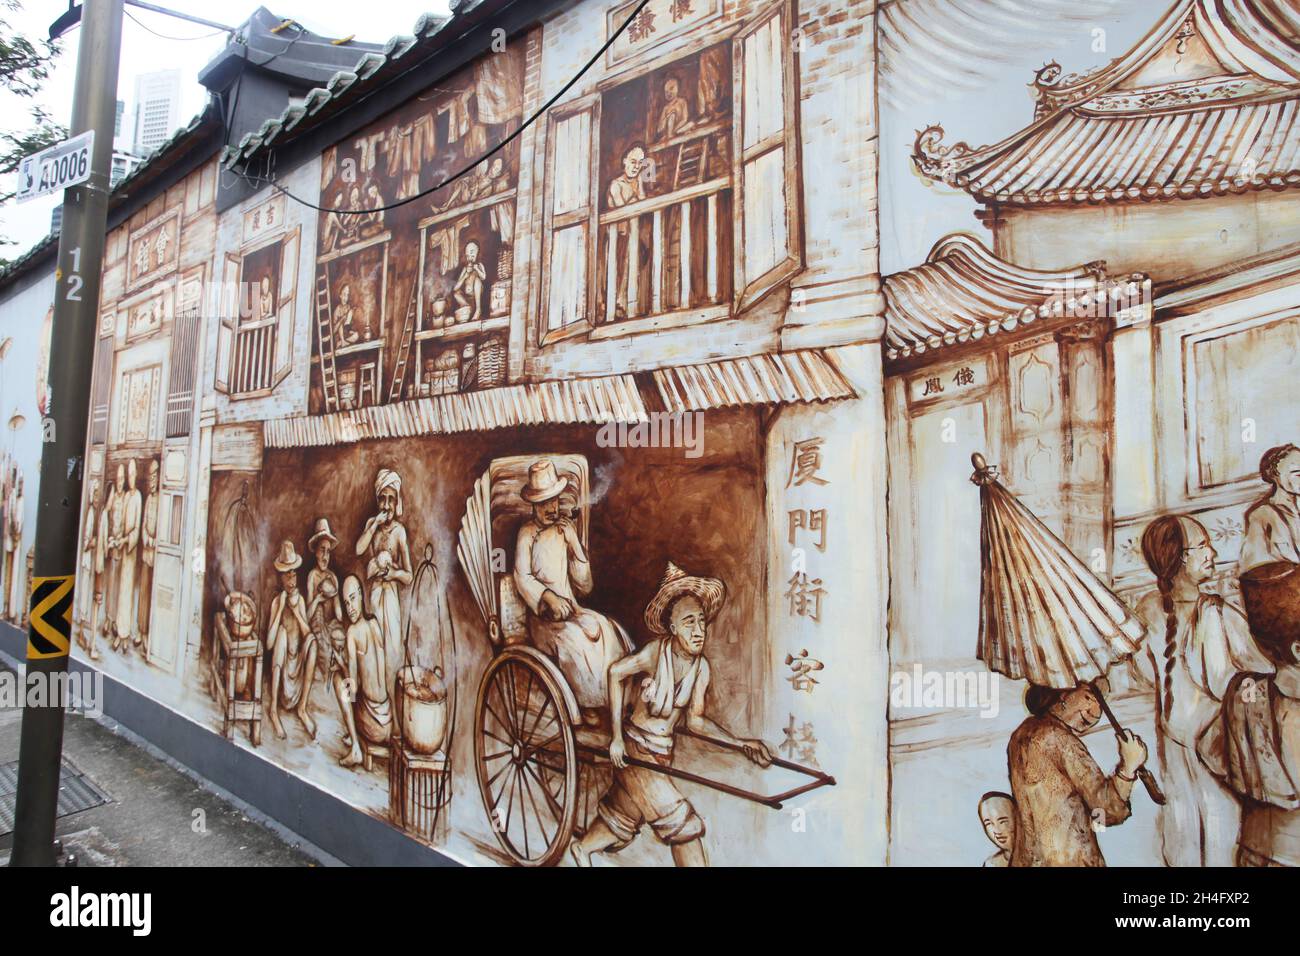 Thian Hock Keng Mural: An Immigrant’s Story. This mural is painted on the external back wall of the Thian Hock Keng temple in Singapore's Chinatown. Stock Photo